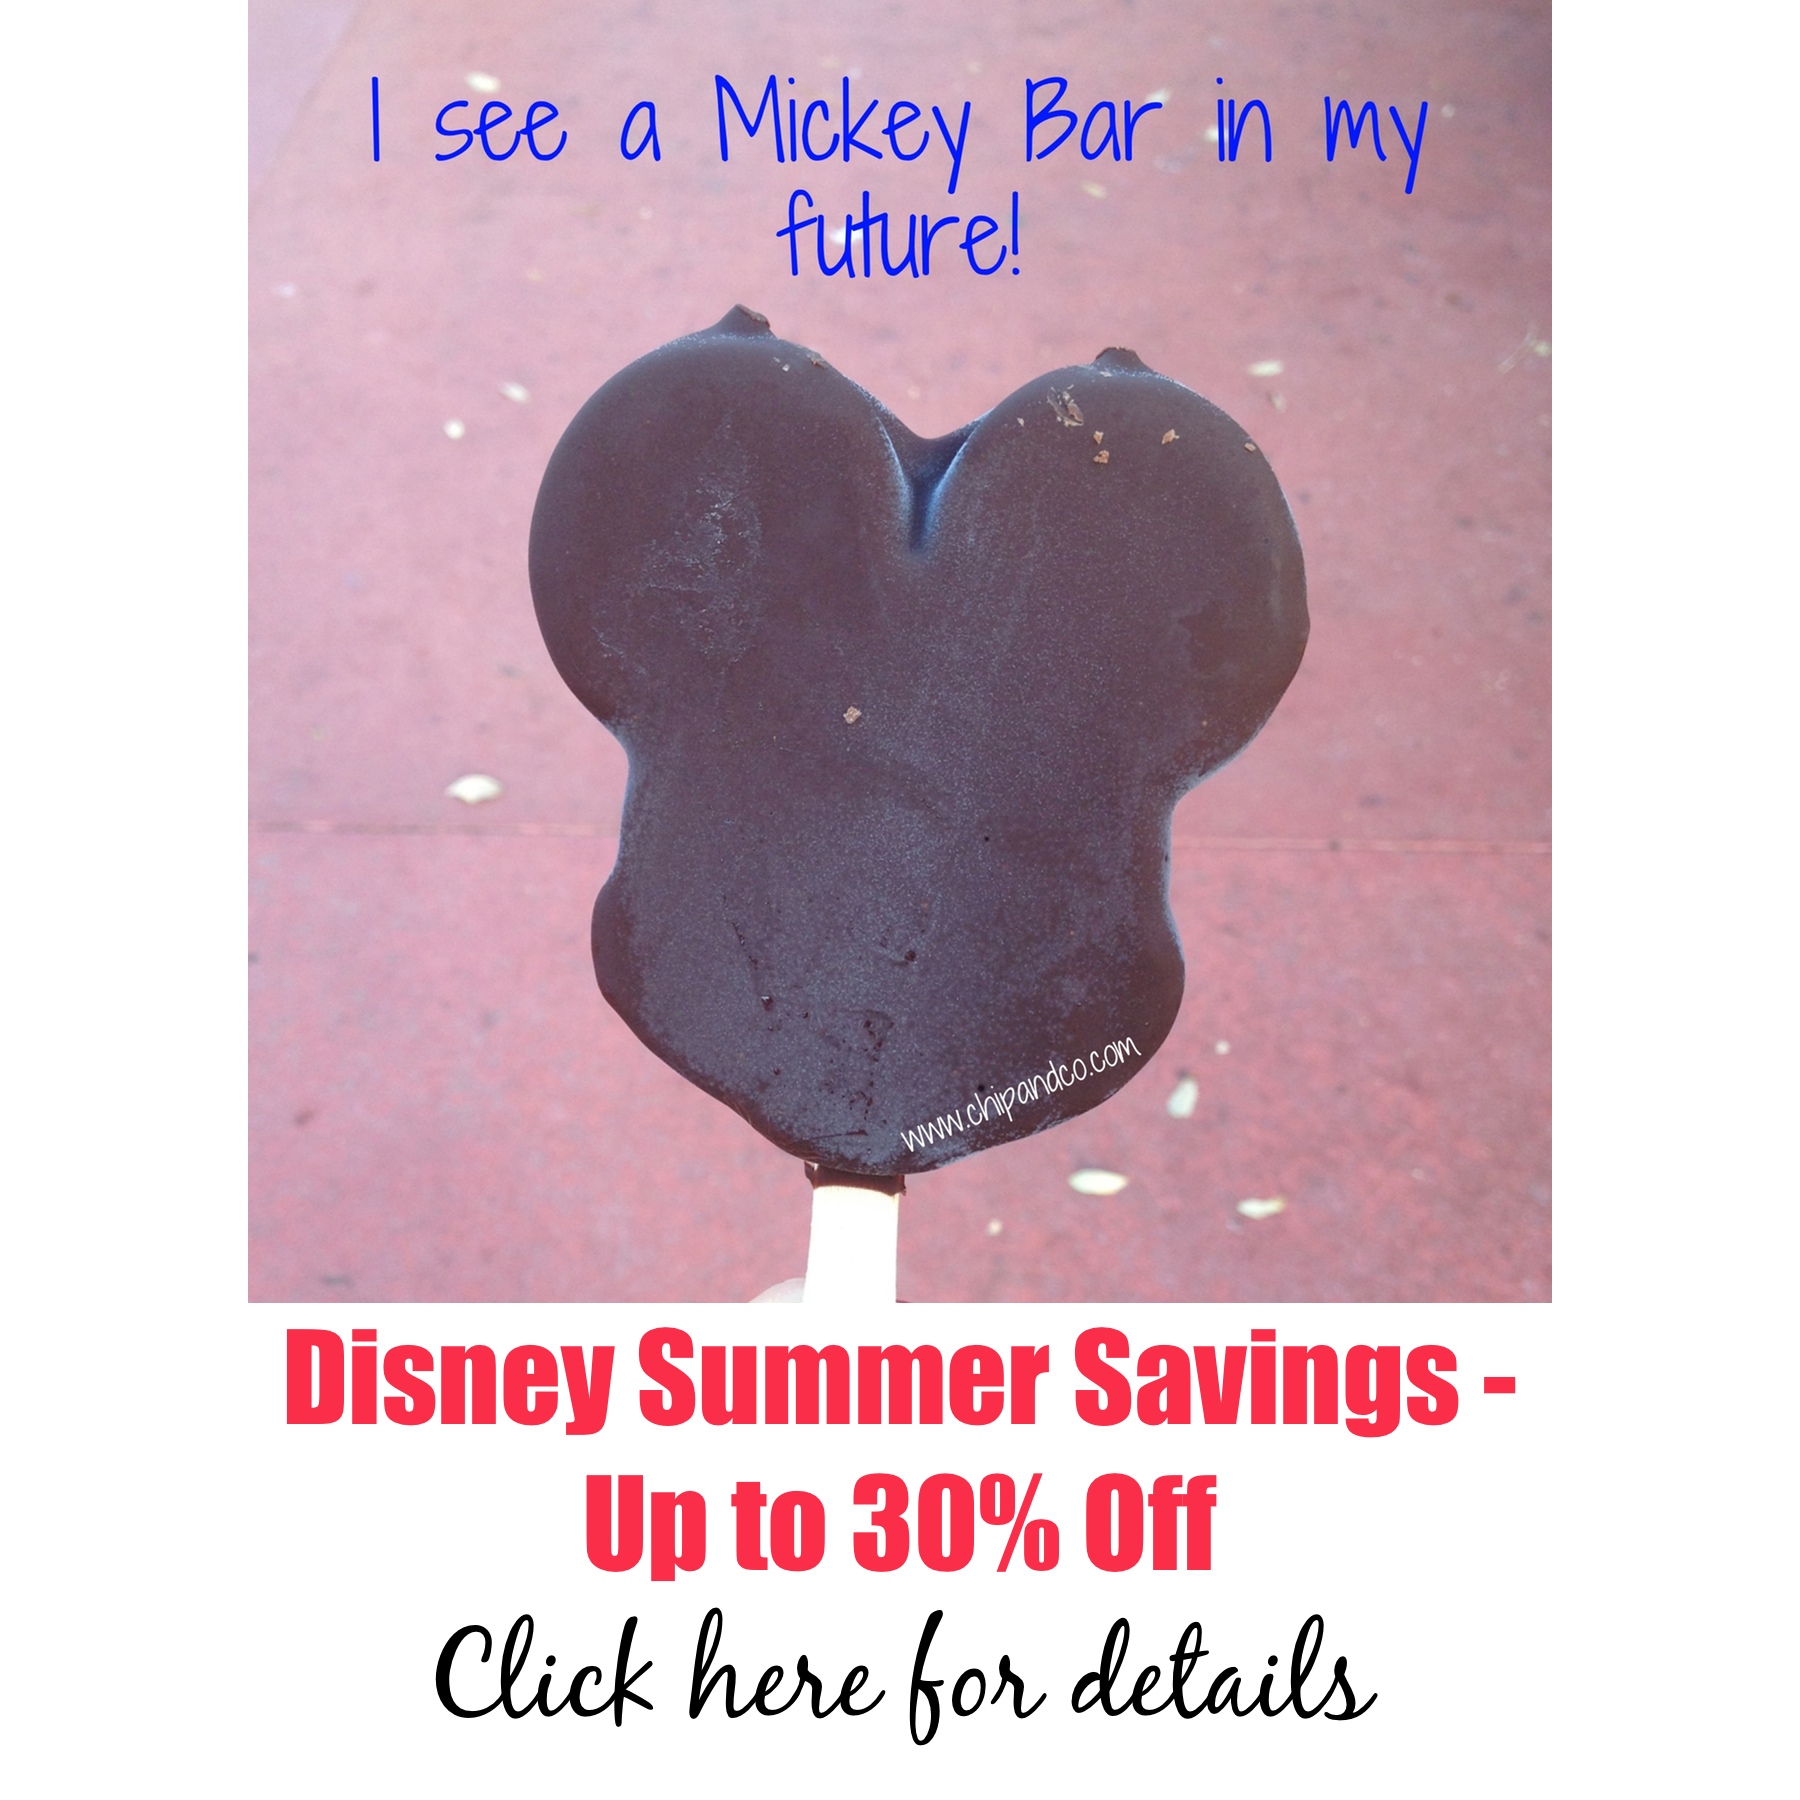 Disney Releases Summer Room Savings of up to 30%!